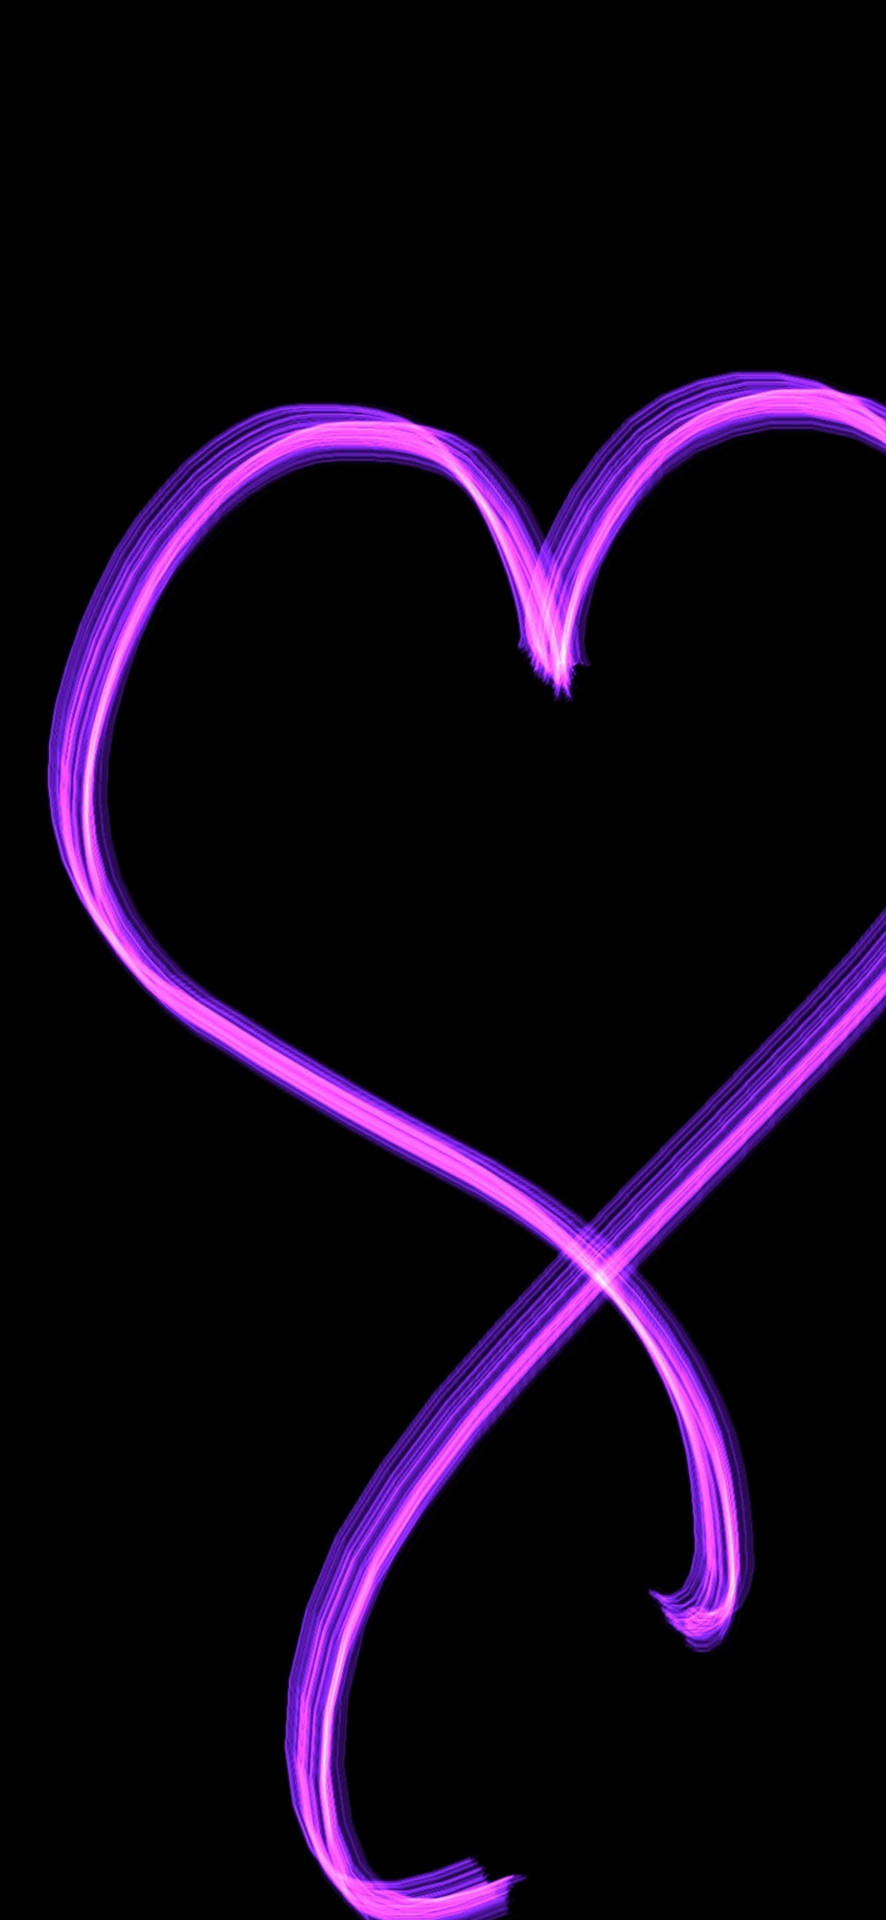 Download Black And Purple Aesthetic Heart Drawing Wallpaper ...